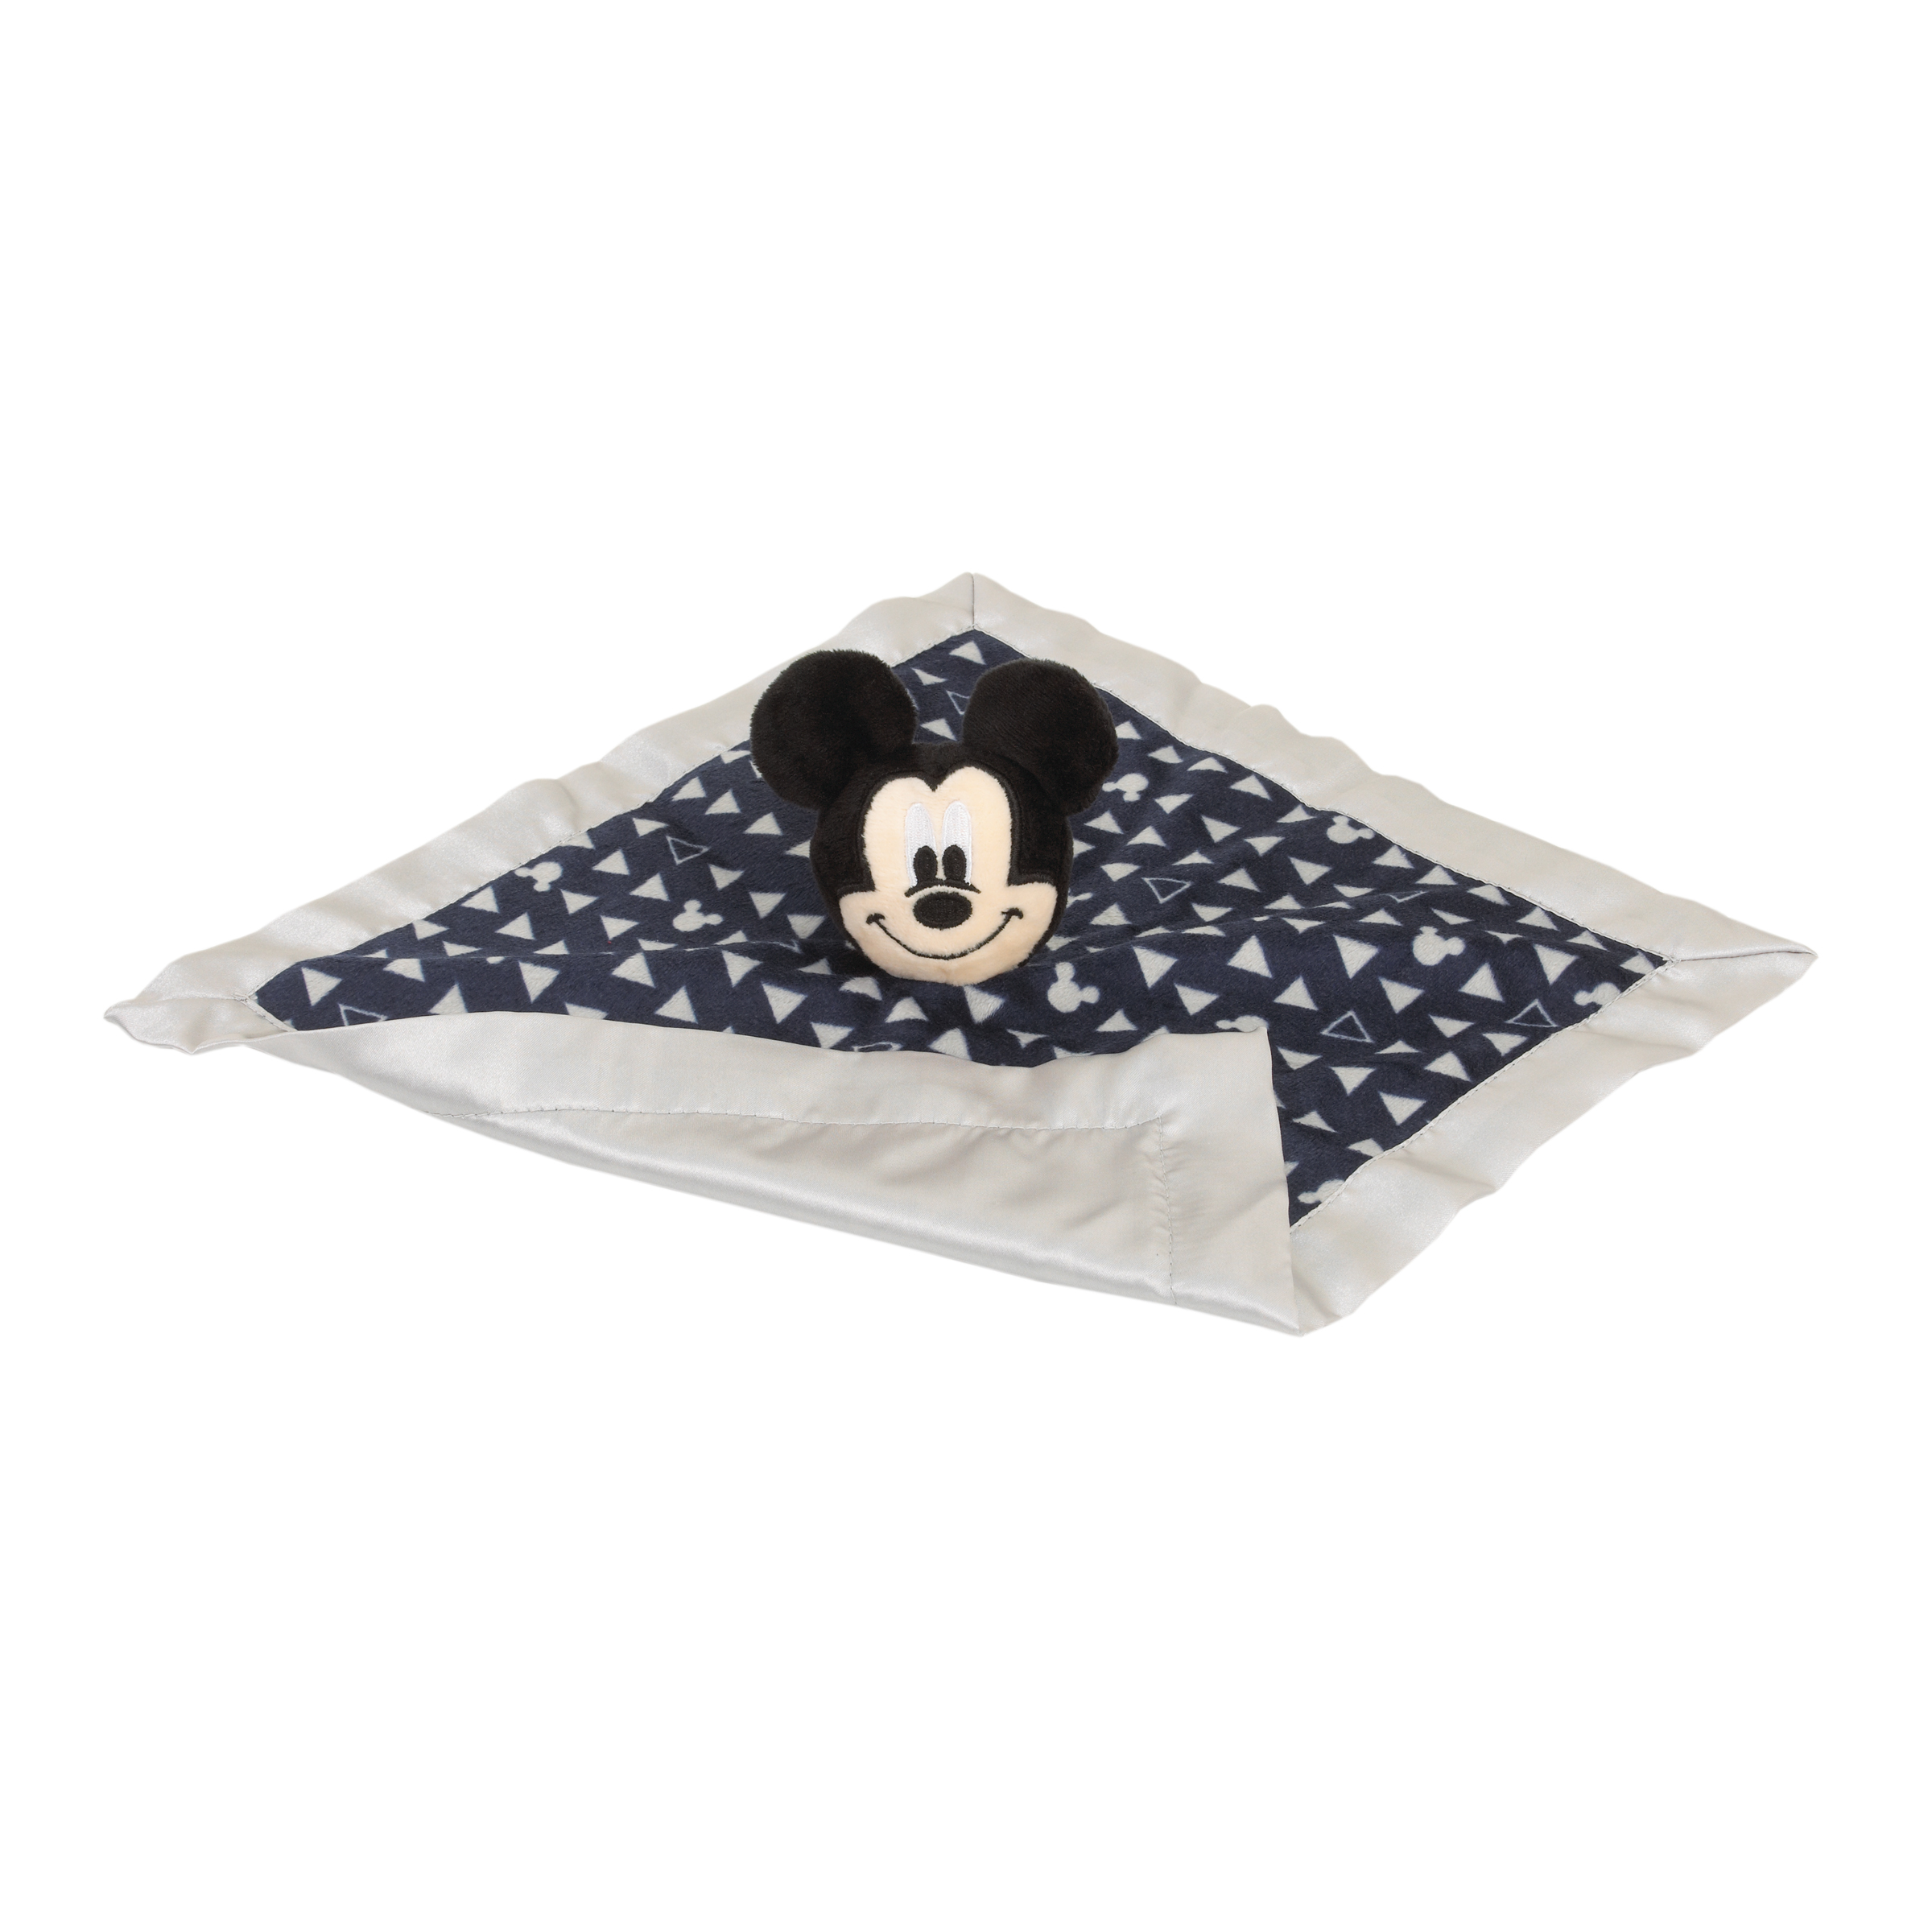 Disney Mickey Mouse Lovey Security Blanket, Navy/Grey - image 3 of 4